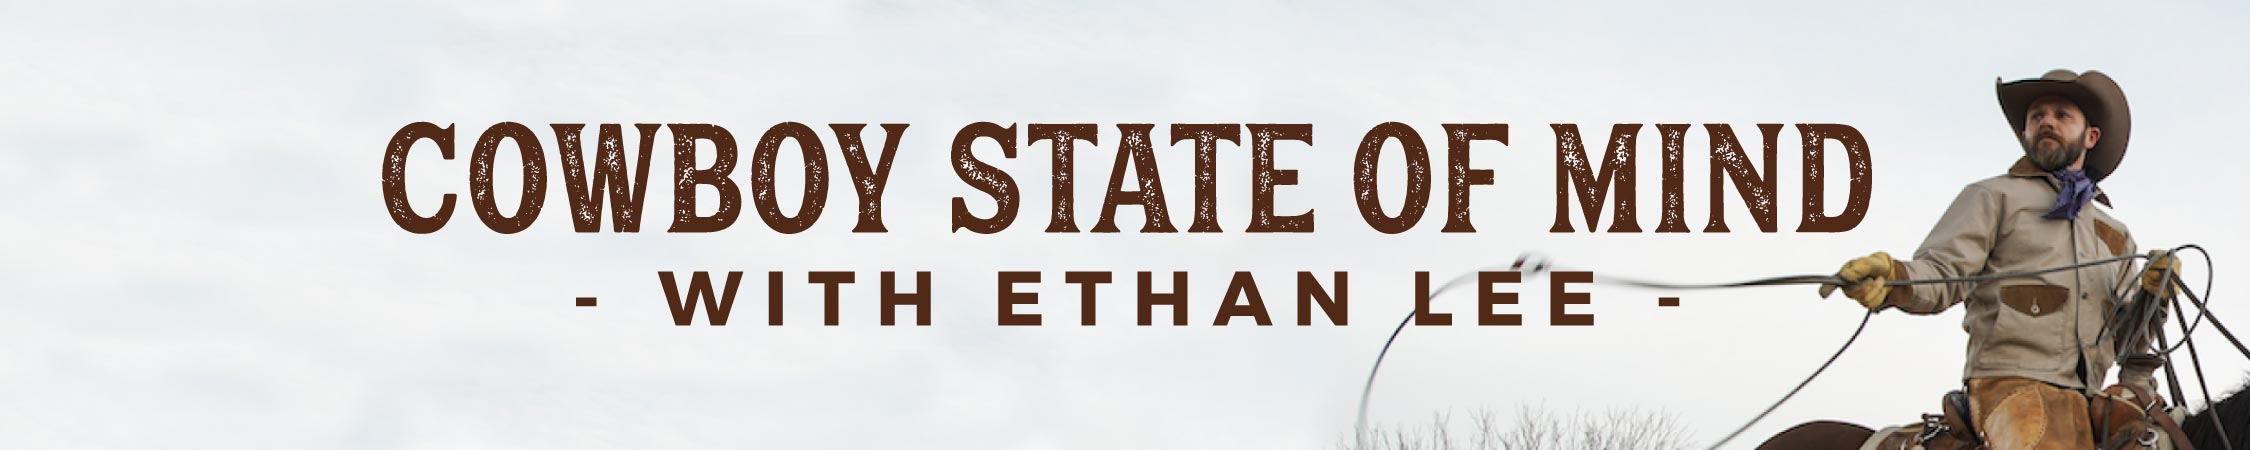 Cowboy State of Mind with Ethan Lee from Yellowstone